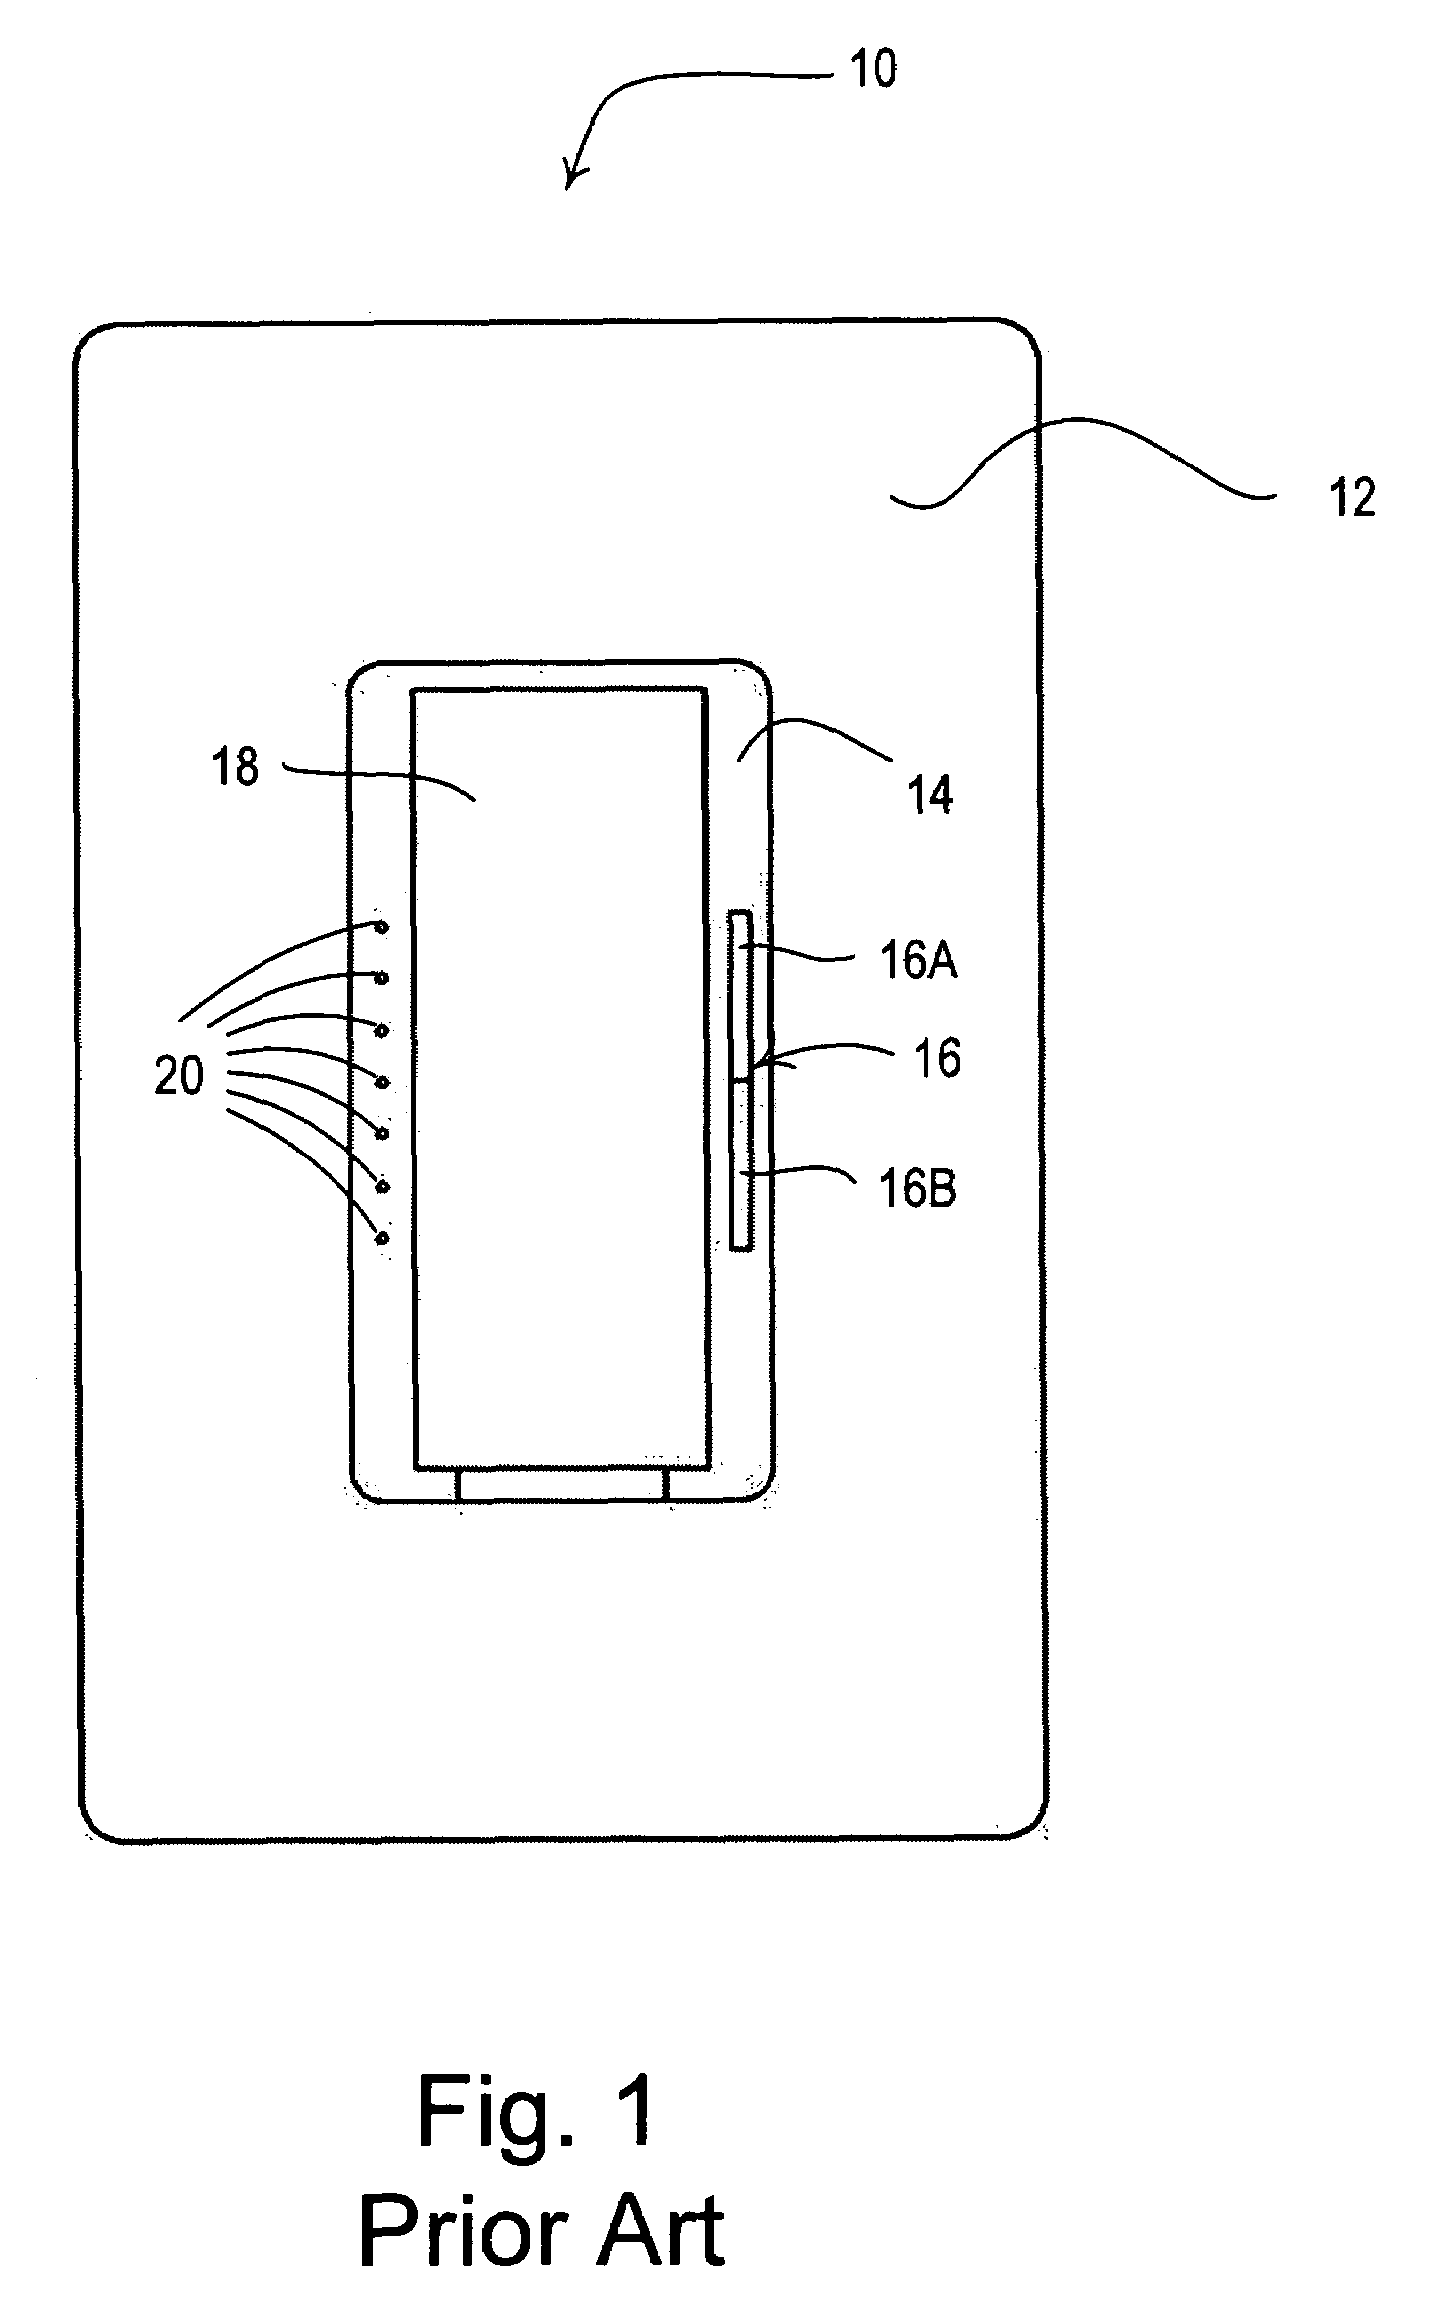 Touch screen having a uniform actuation force and a maximum active area